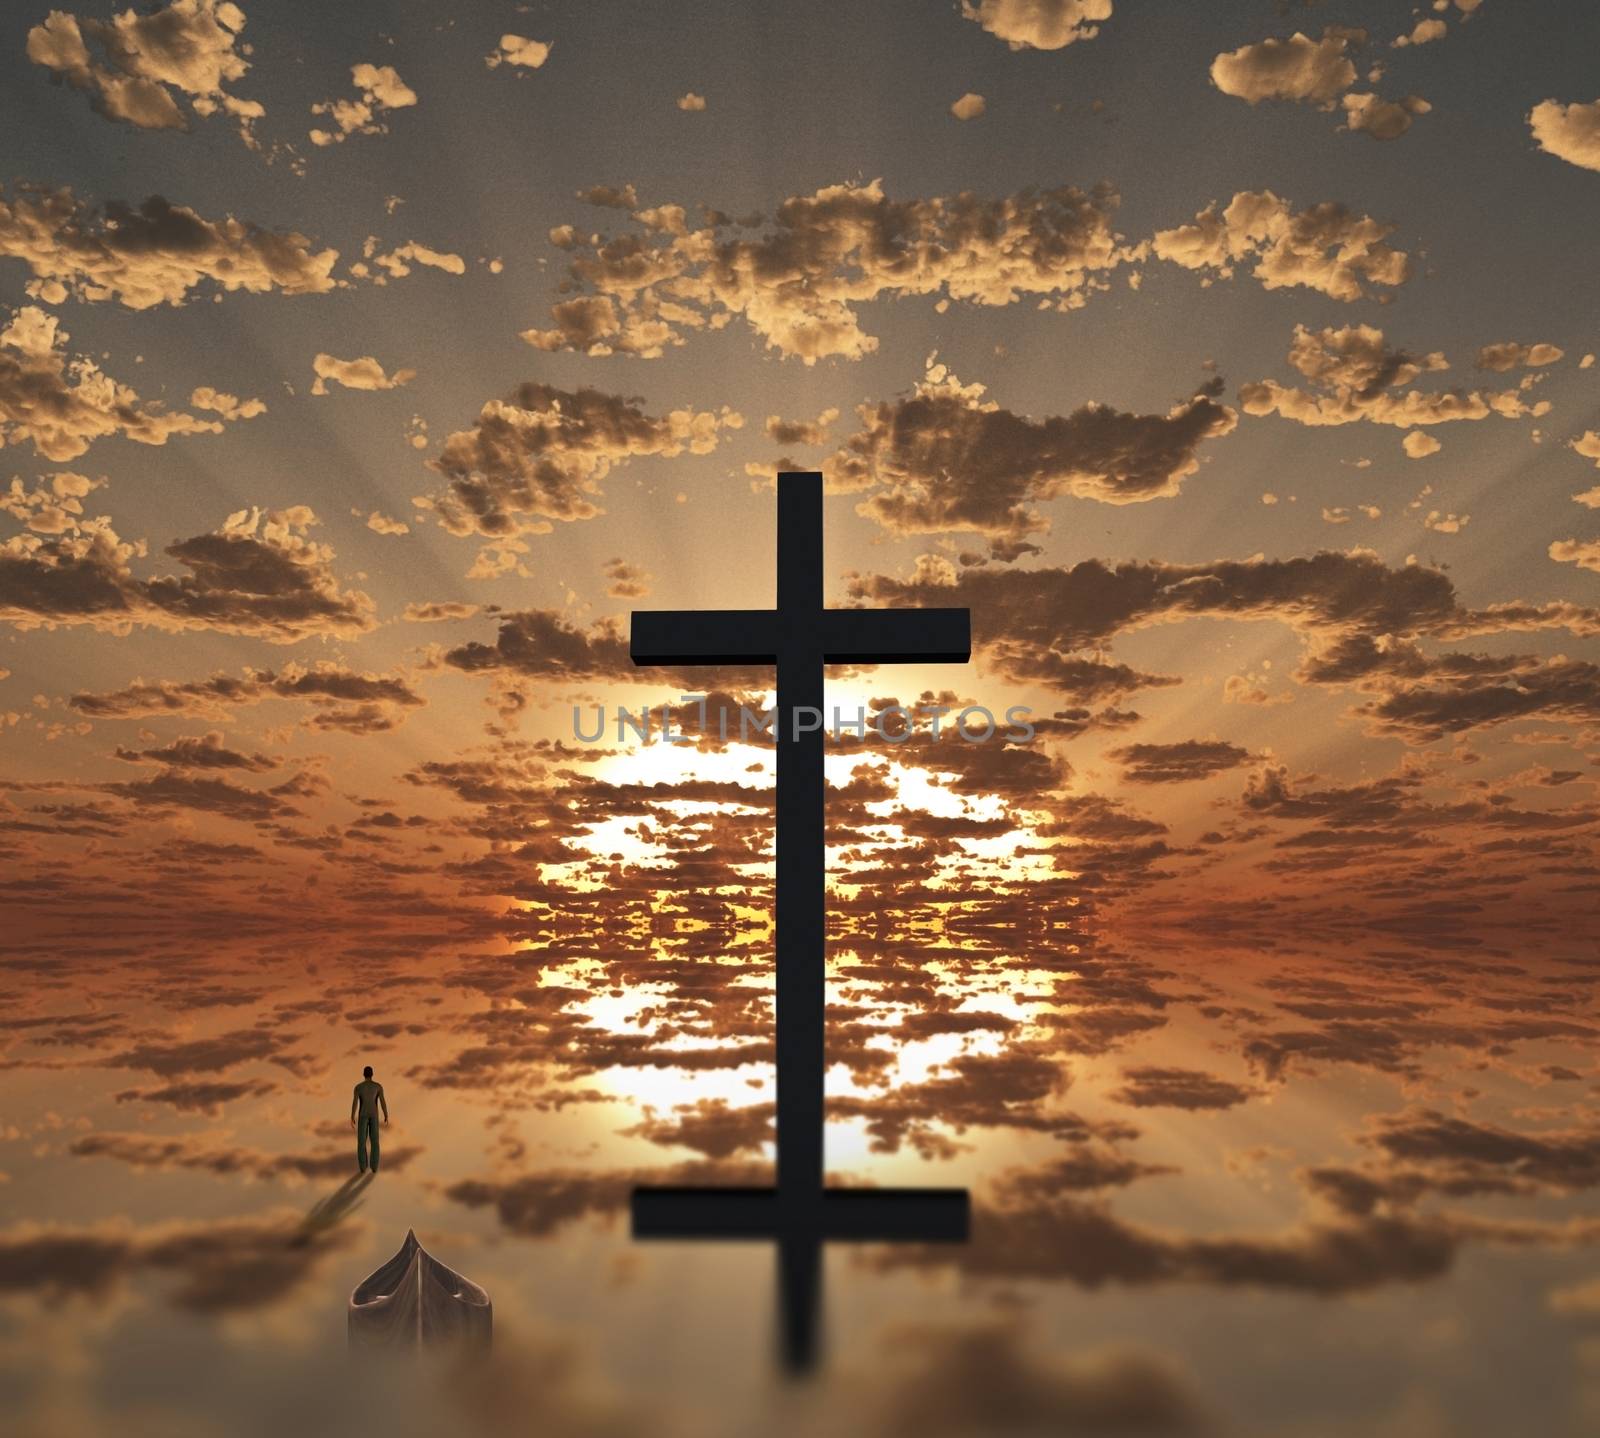 Man with boat near giant cross with sunrise background